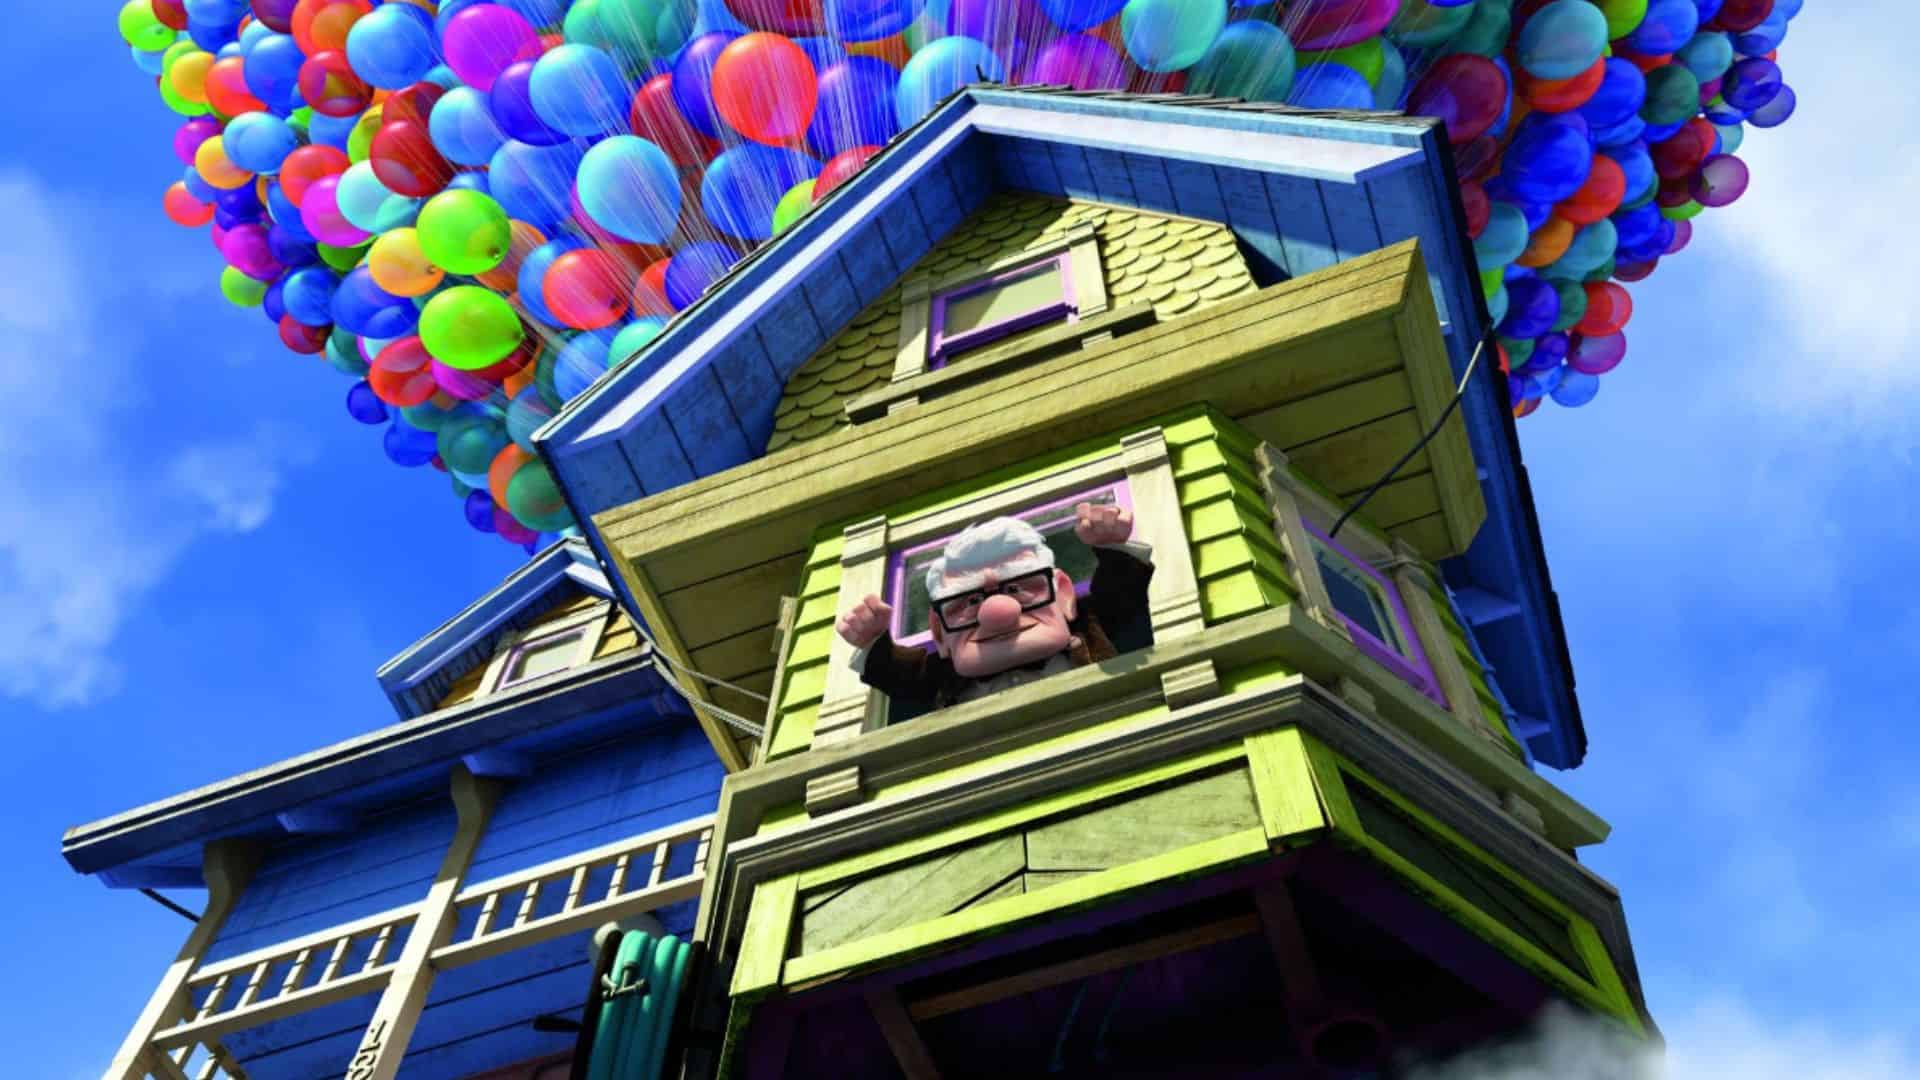 Carl Fredricksen looking down from his flying house in this image from Pixar